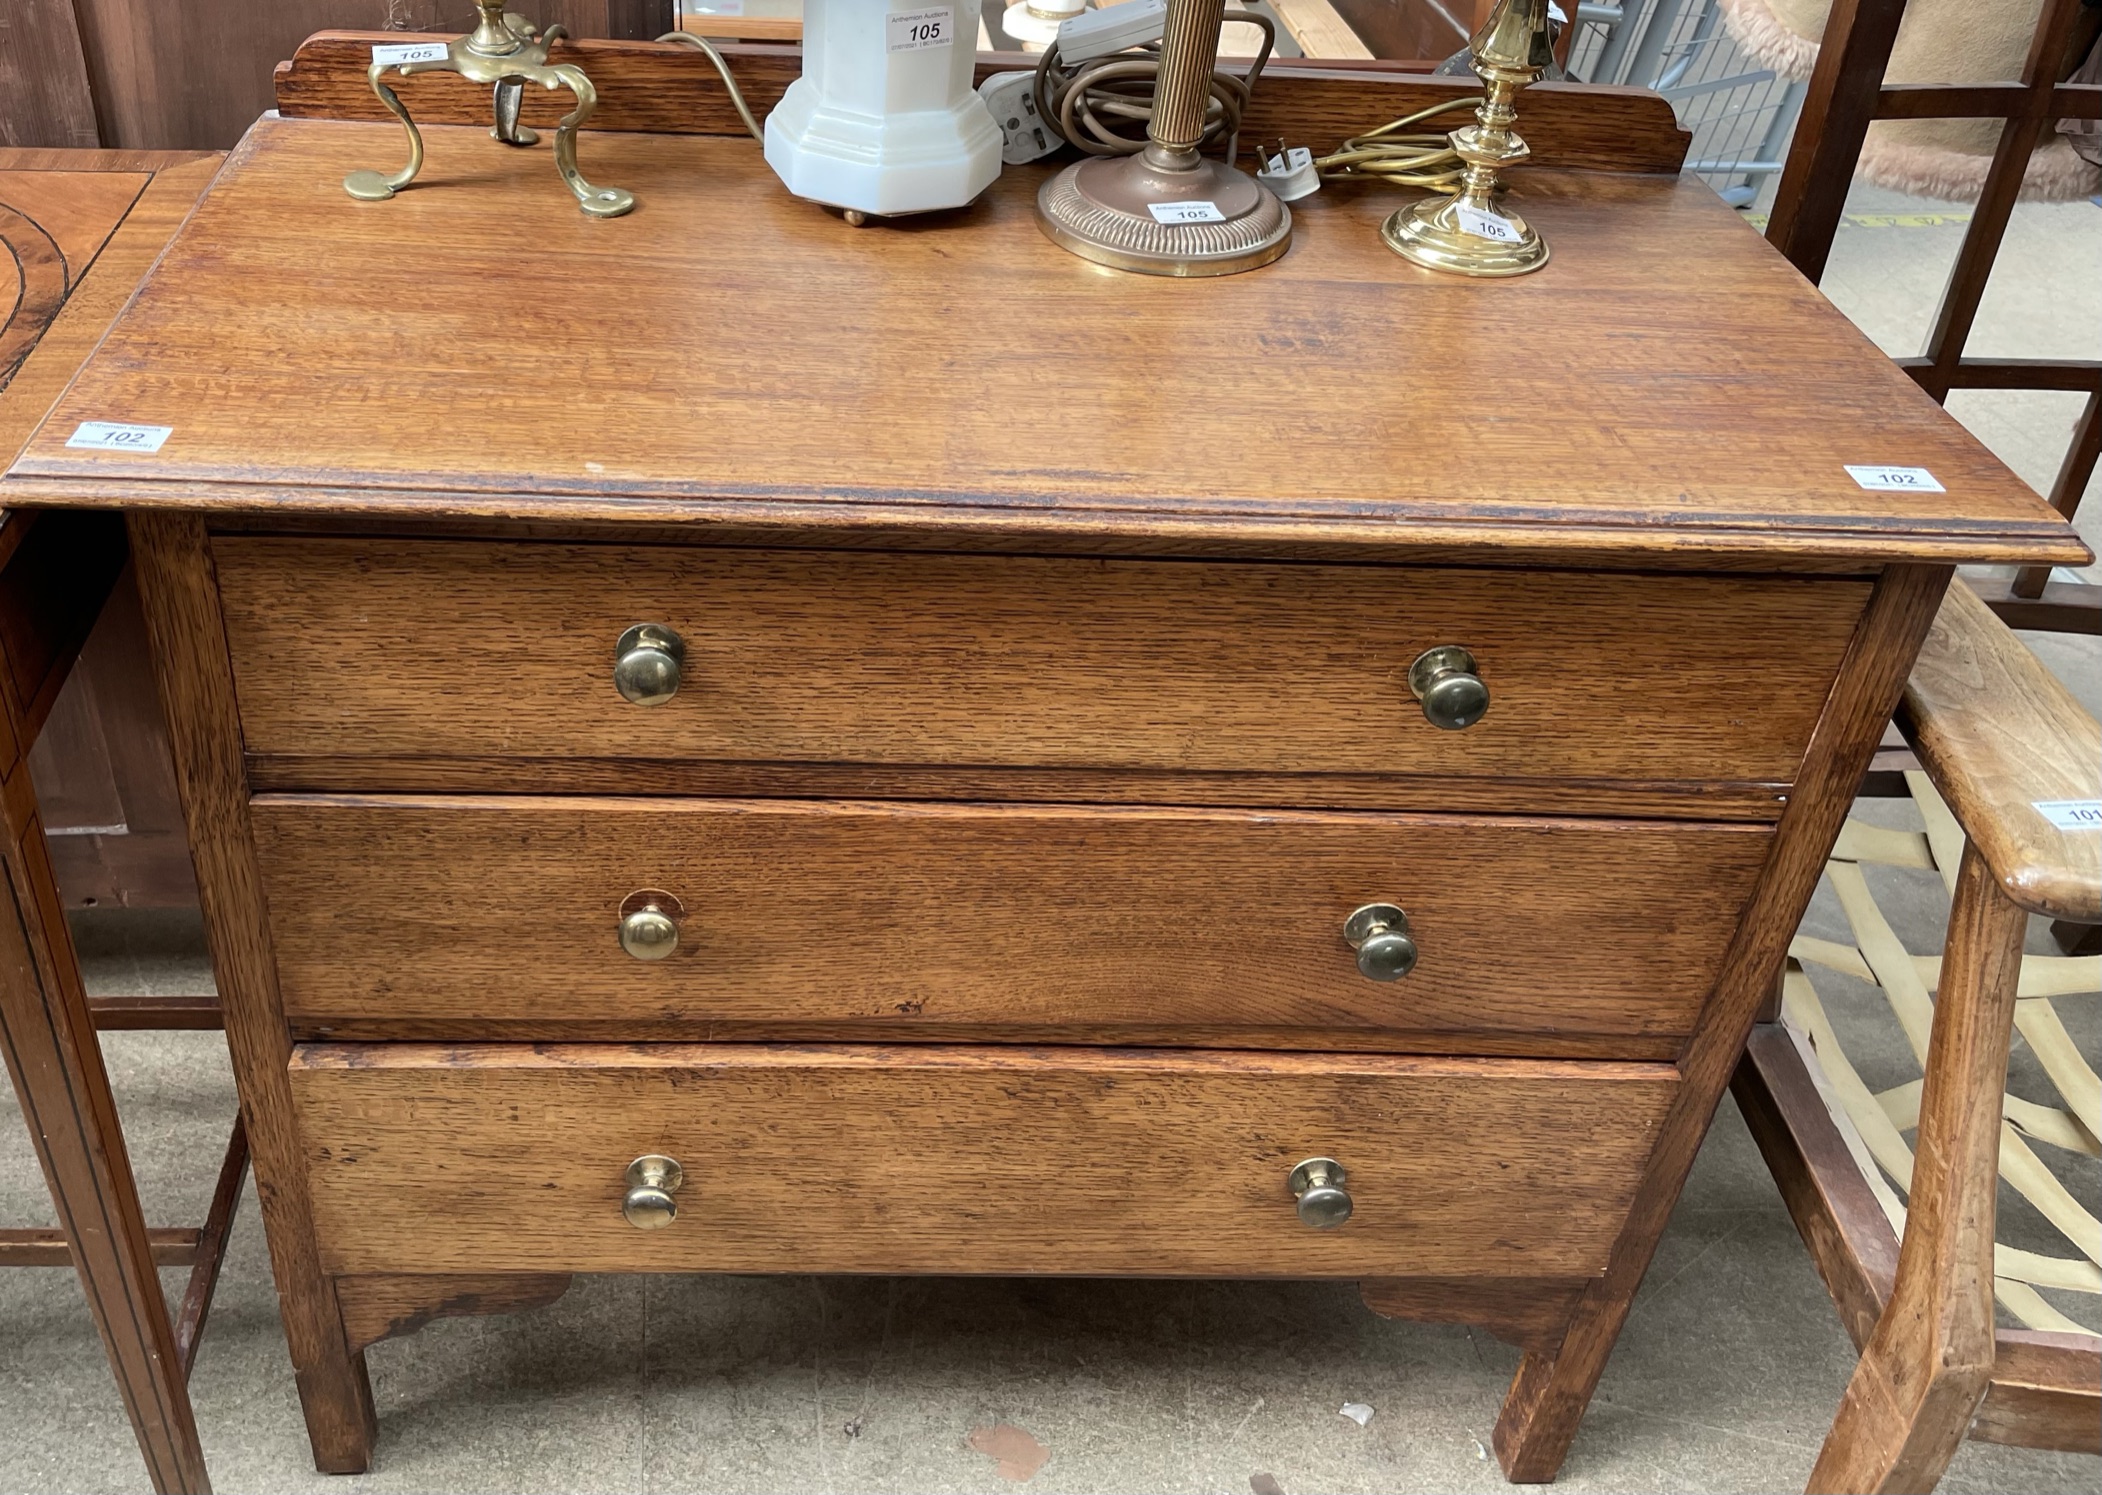 An early 20th century oak dressing chest with three drawers on square legs